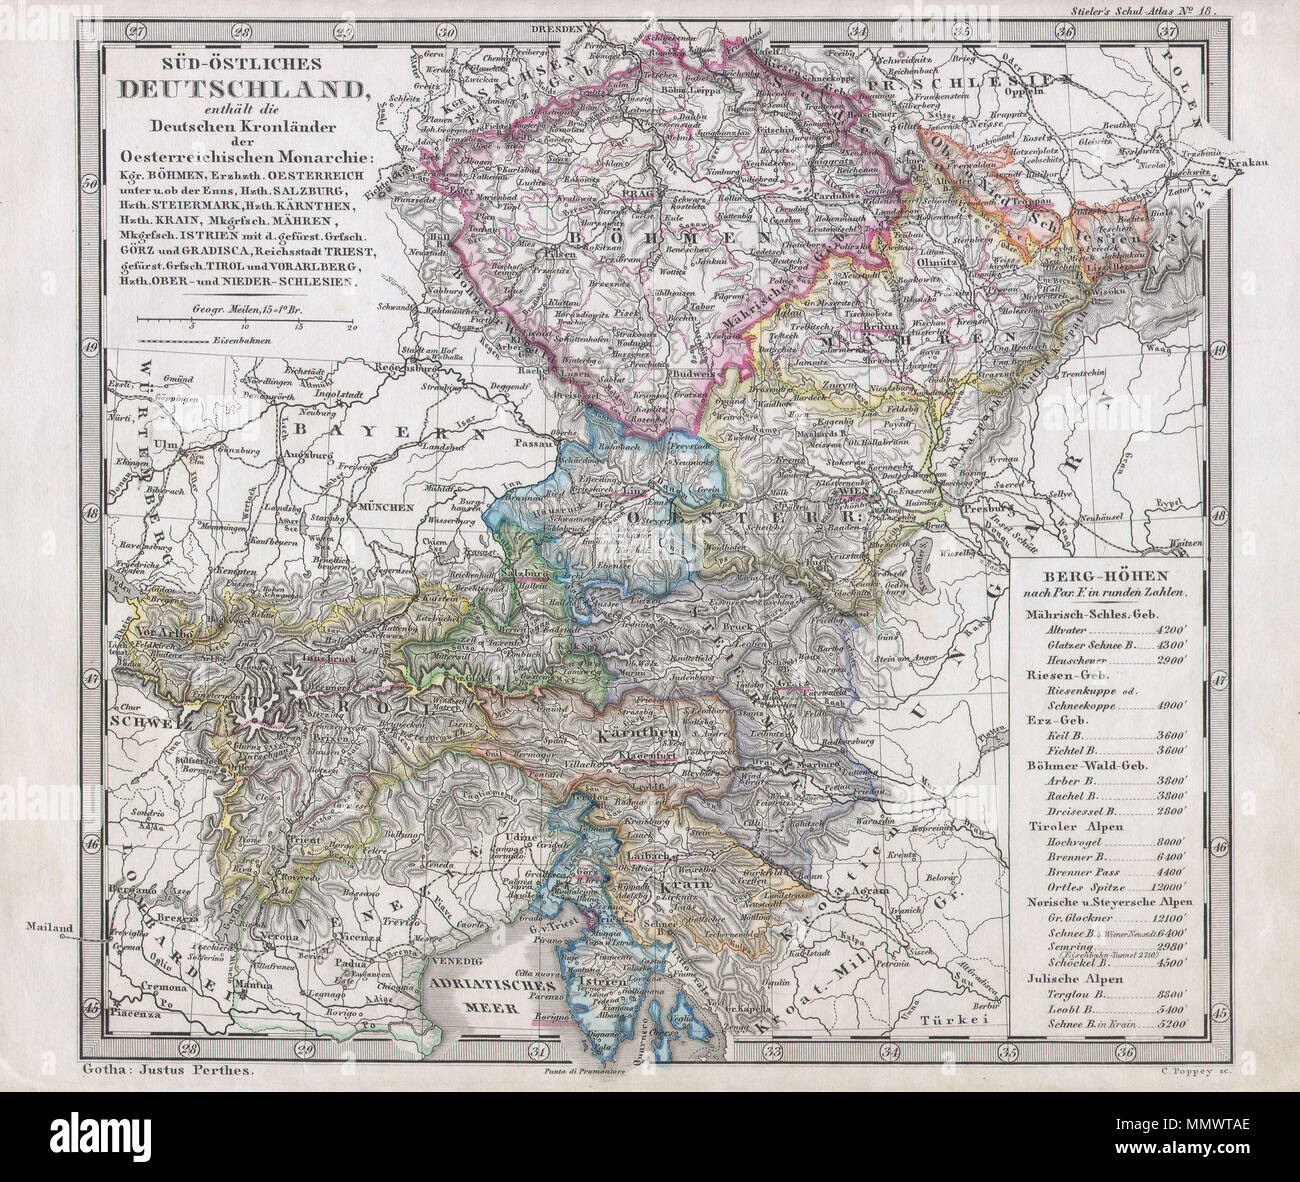 .  English: This fascinating 1862 map by Justus Perthes and Stieler depicts Bohemia (modern day Czech Republic) and Austria. Unlike other cartographic publishers of the period, the Justus Perthes firm, did not transition to lithographic printing techniques until the early 1870s. Instead, all of his maps are copper plate engravings and hence offer a level of character and depth of detail that was impossible to find in lithography or wax-process engraving. All text in German. Issued in the 1862 edition of Stieler’s Schul-Atlas.  Sud-ostliches Deutschland.. 1862. 1862 Perthes Map of Bohemia and A Stock Photo